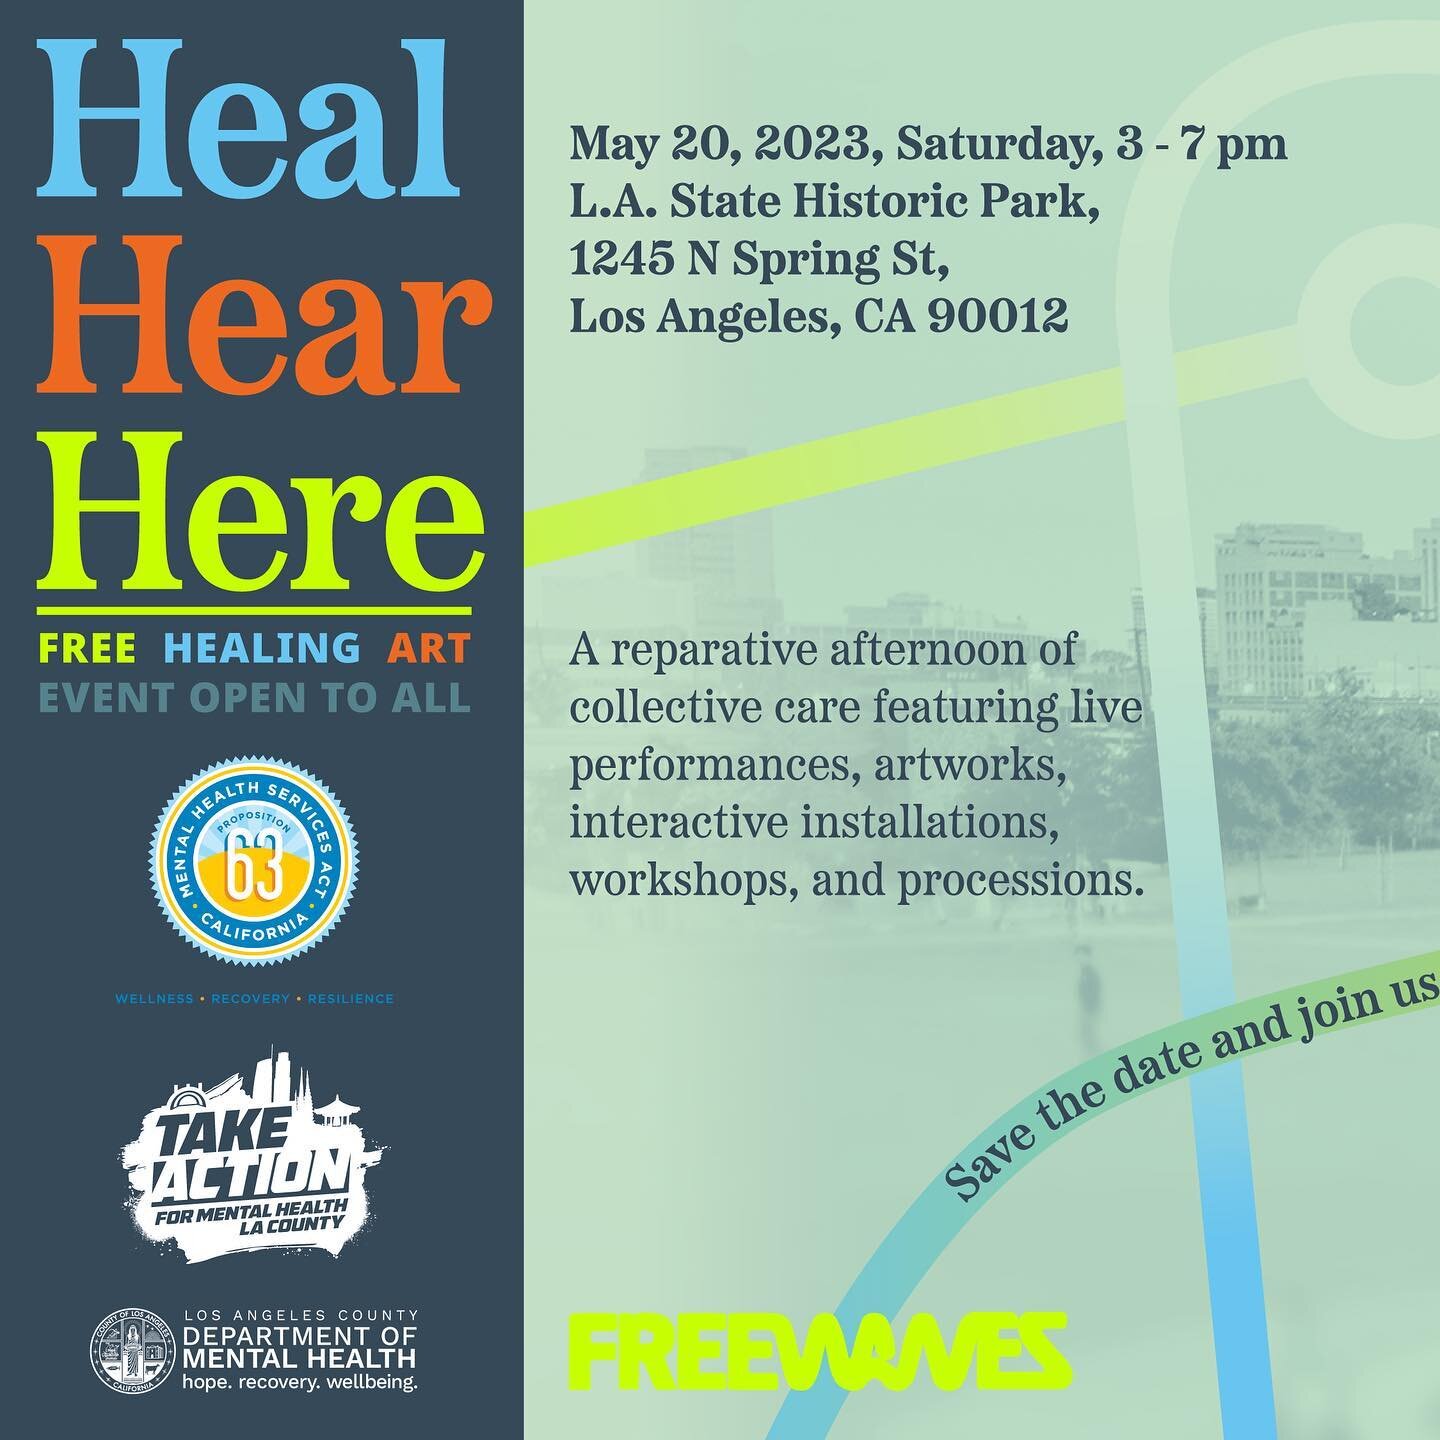 🌱 Embracing the power of art and collective healing! Join me this Saturday for &quot;Heal Hear Here,&quot; an extraordinary art event where over 30+ organizations and artists unite to create a transformative healing experience. 

As the graphic desi